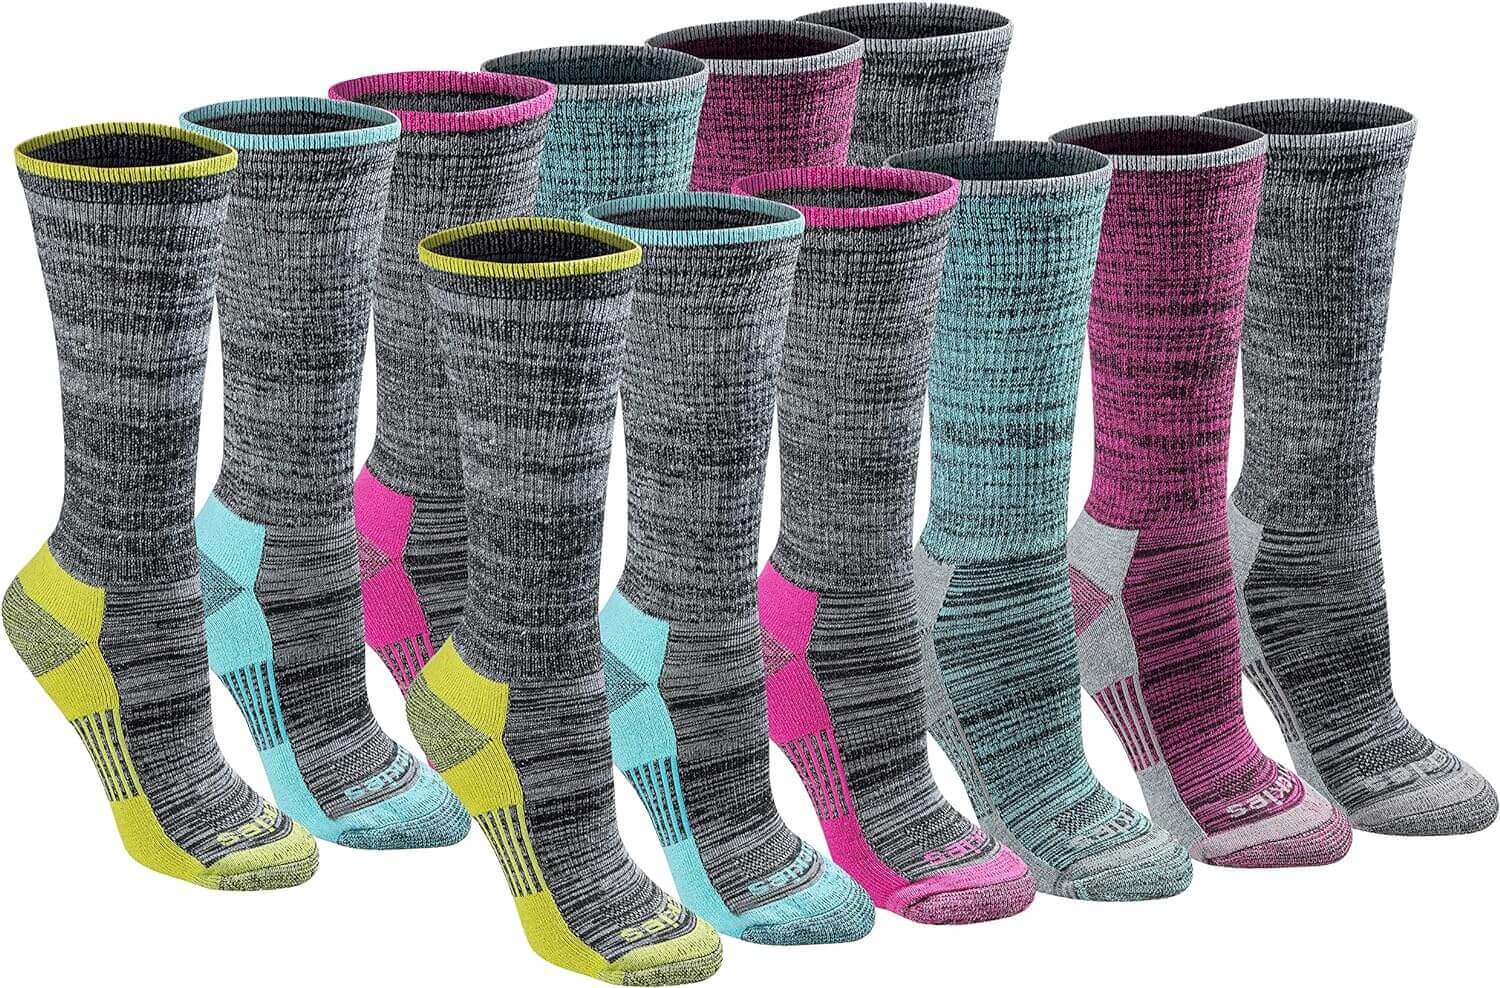 Shop The Latest >Women's Dri-tech Moisture Control Crew Socks Multipack > *Only $37.79*> From The Top Brand > *Dickiesl* > Shop Now and Get Free Shipping On Orders Over $45.00 >*Shop Earth Foot*